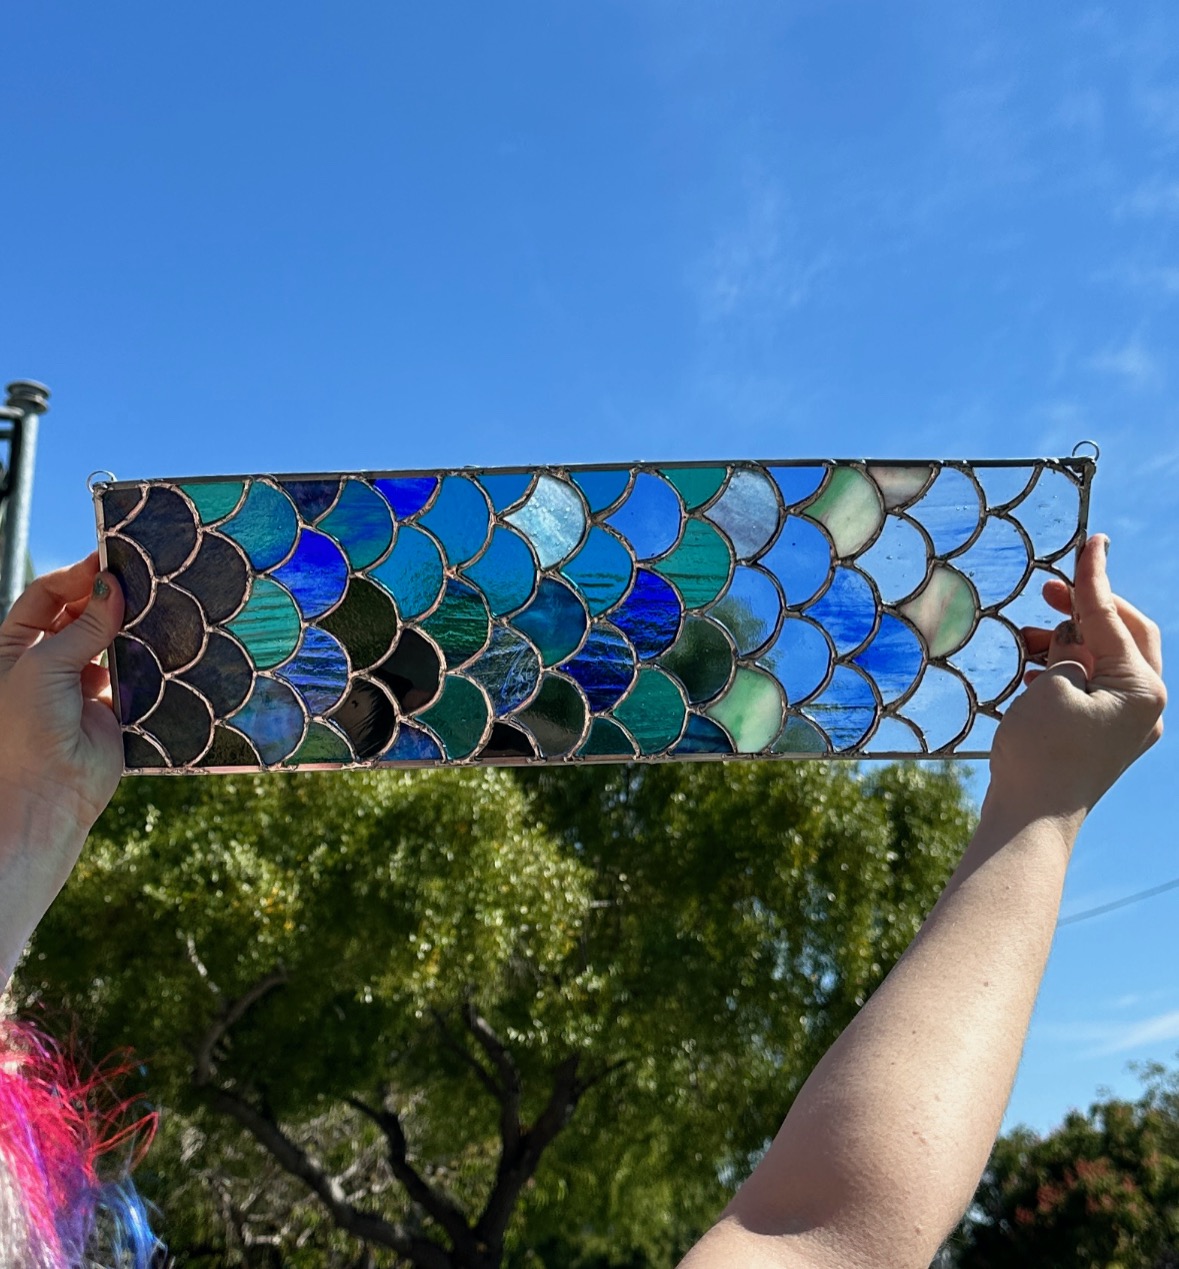 A white woman's arms hold a rectangular stained glass pane up against the sky and trees. The glass is many shades of blue, green, and clear, done in the shape of fish scales.